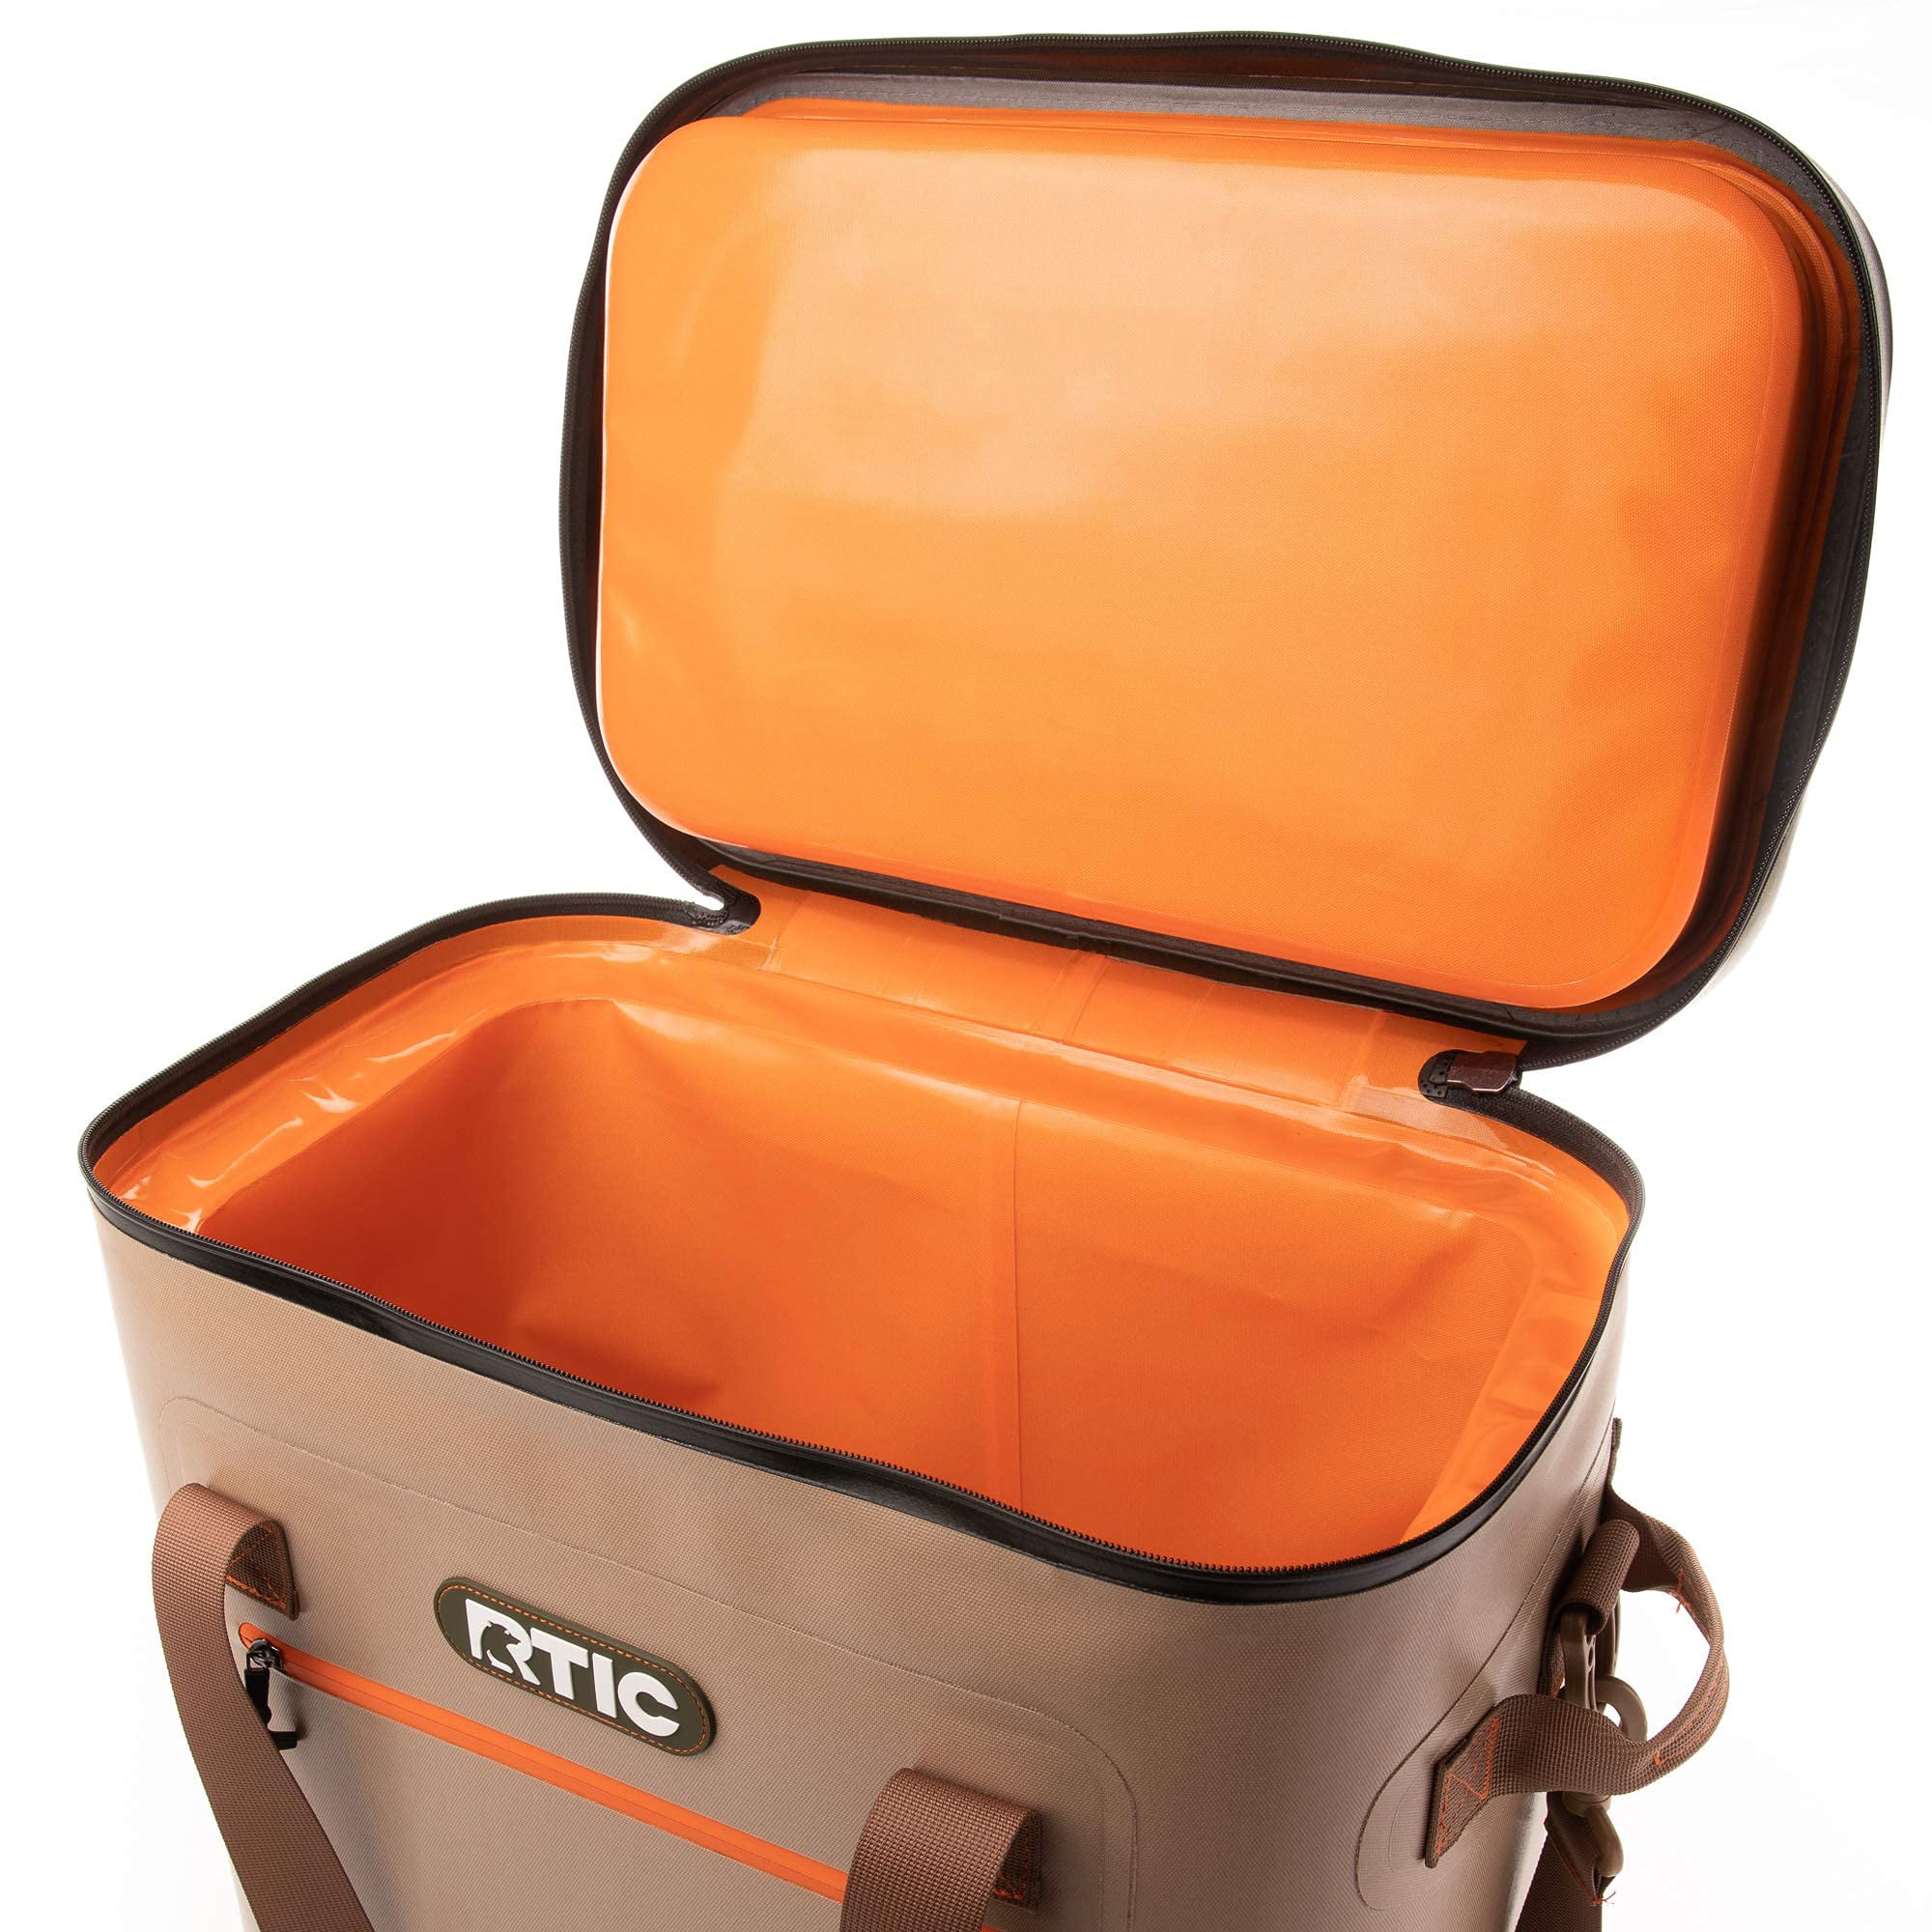 RTIC Outdoors 40 Cans Soft Sided Cooler - Deep Harbor